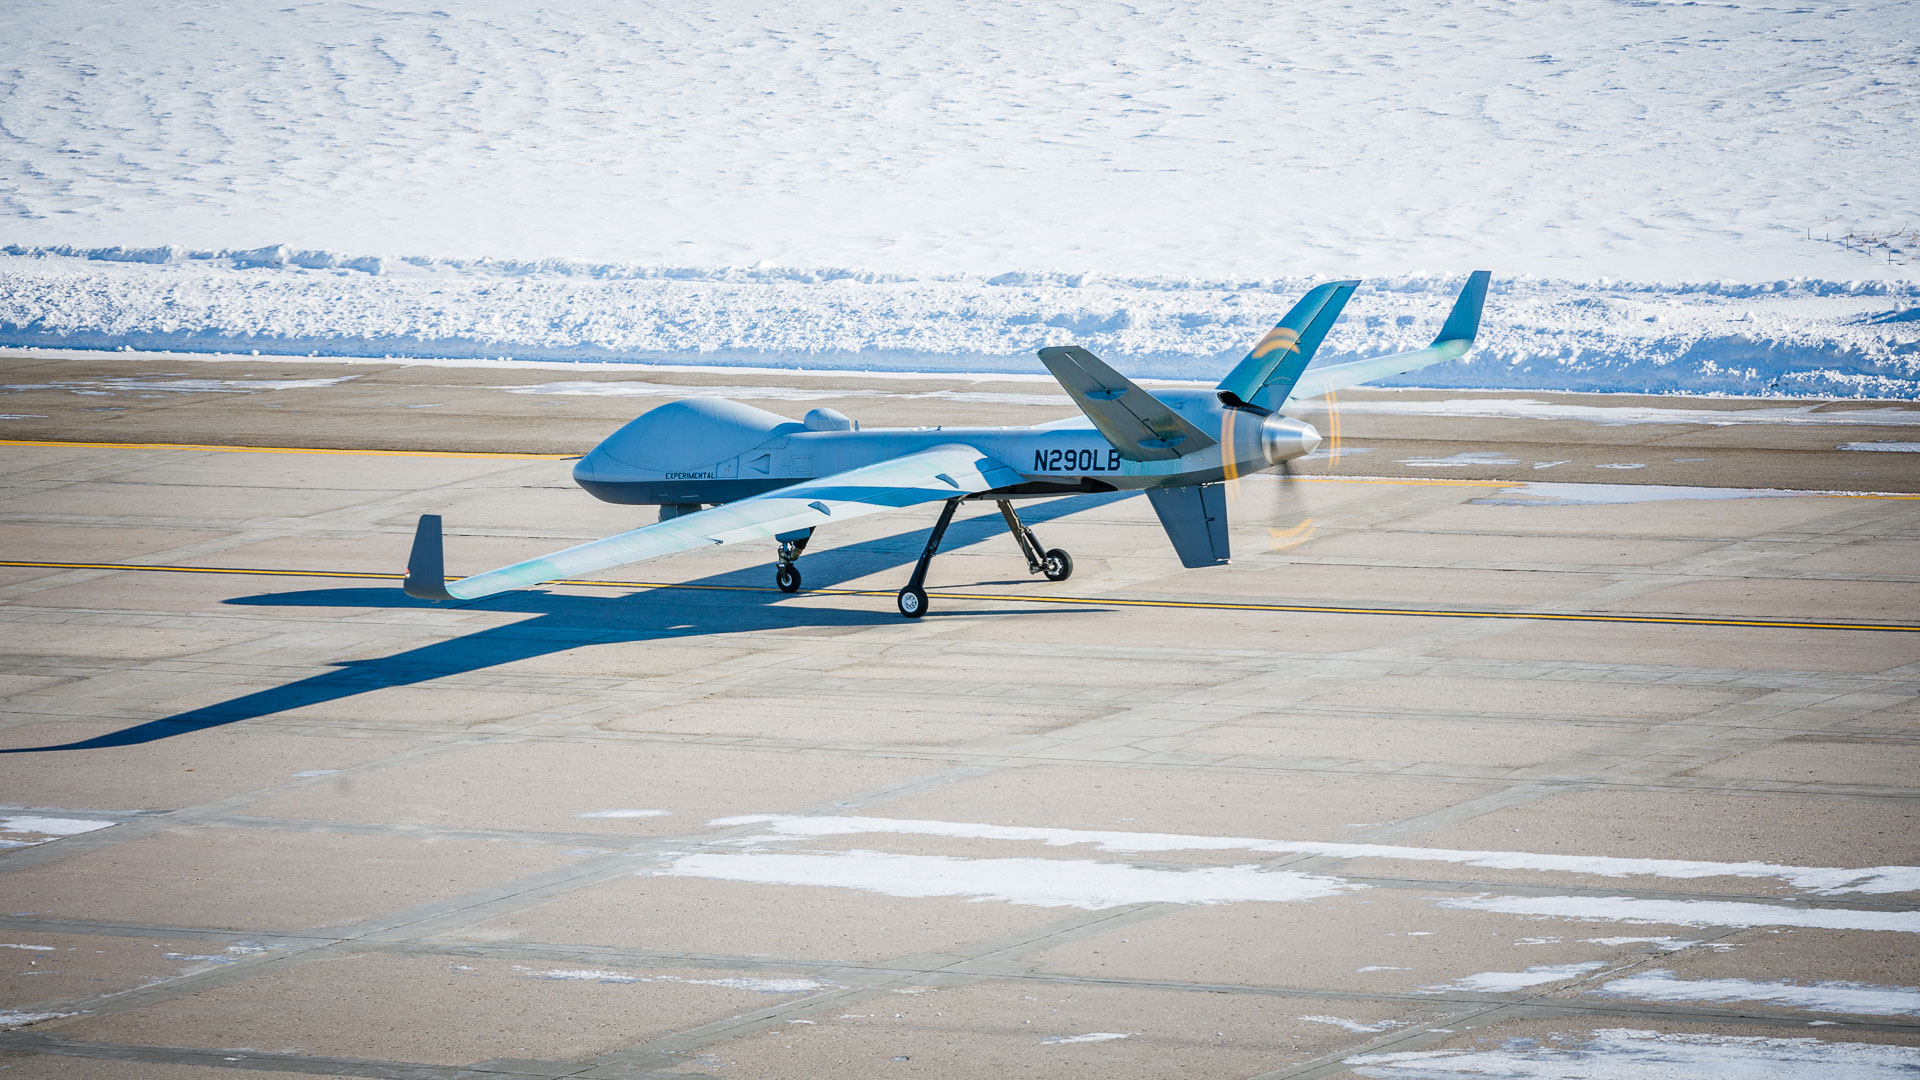 MQ-9B SkyGuardian undergoing cold weather validation in Grand Forks, ND. Photo: General Atomics Aeronautical Systems, Inc. (GA-ASI)